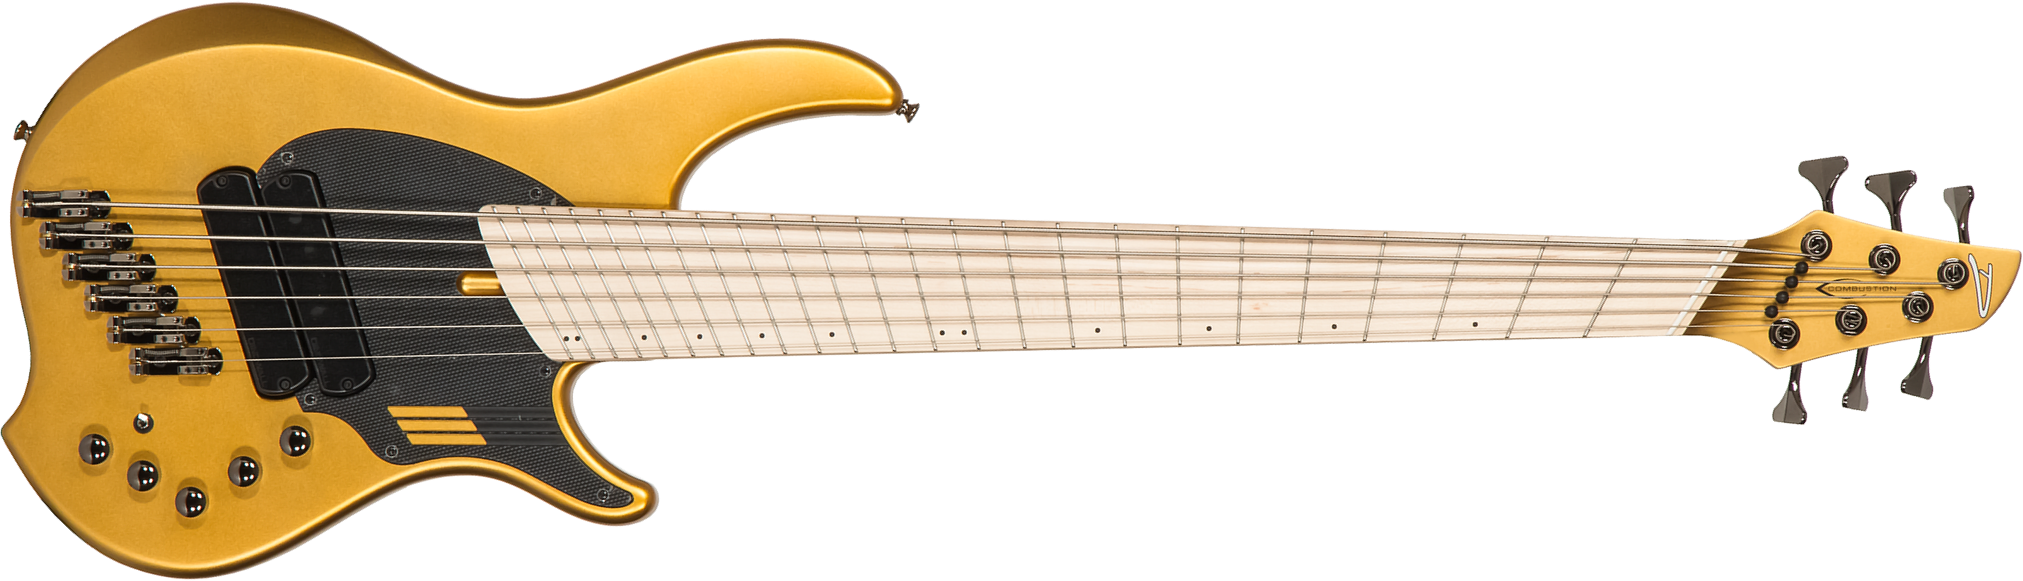 Dingwall Adam Nolly Getgood Ng2 6c 2pu Signature Active Mn - Gold Matte - Solid body electric bass - Main picture